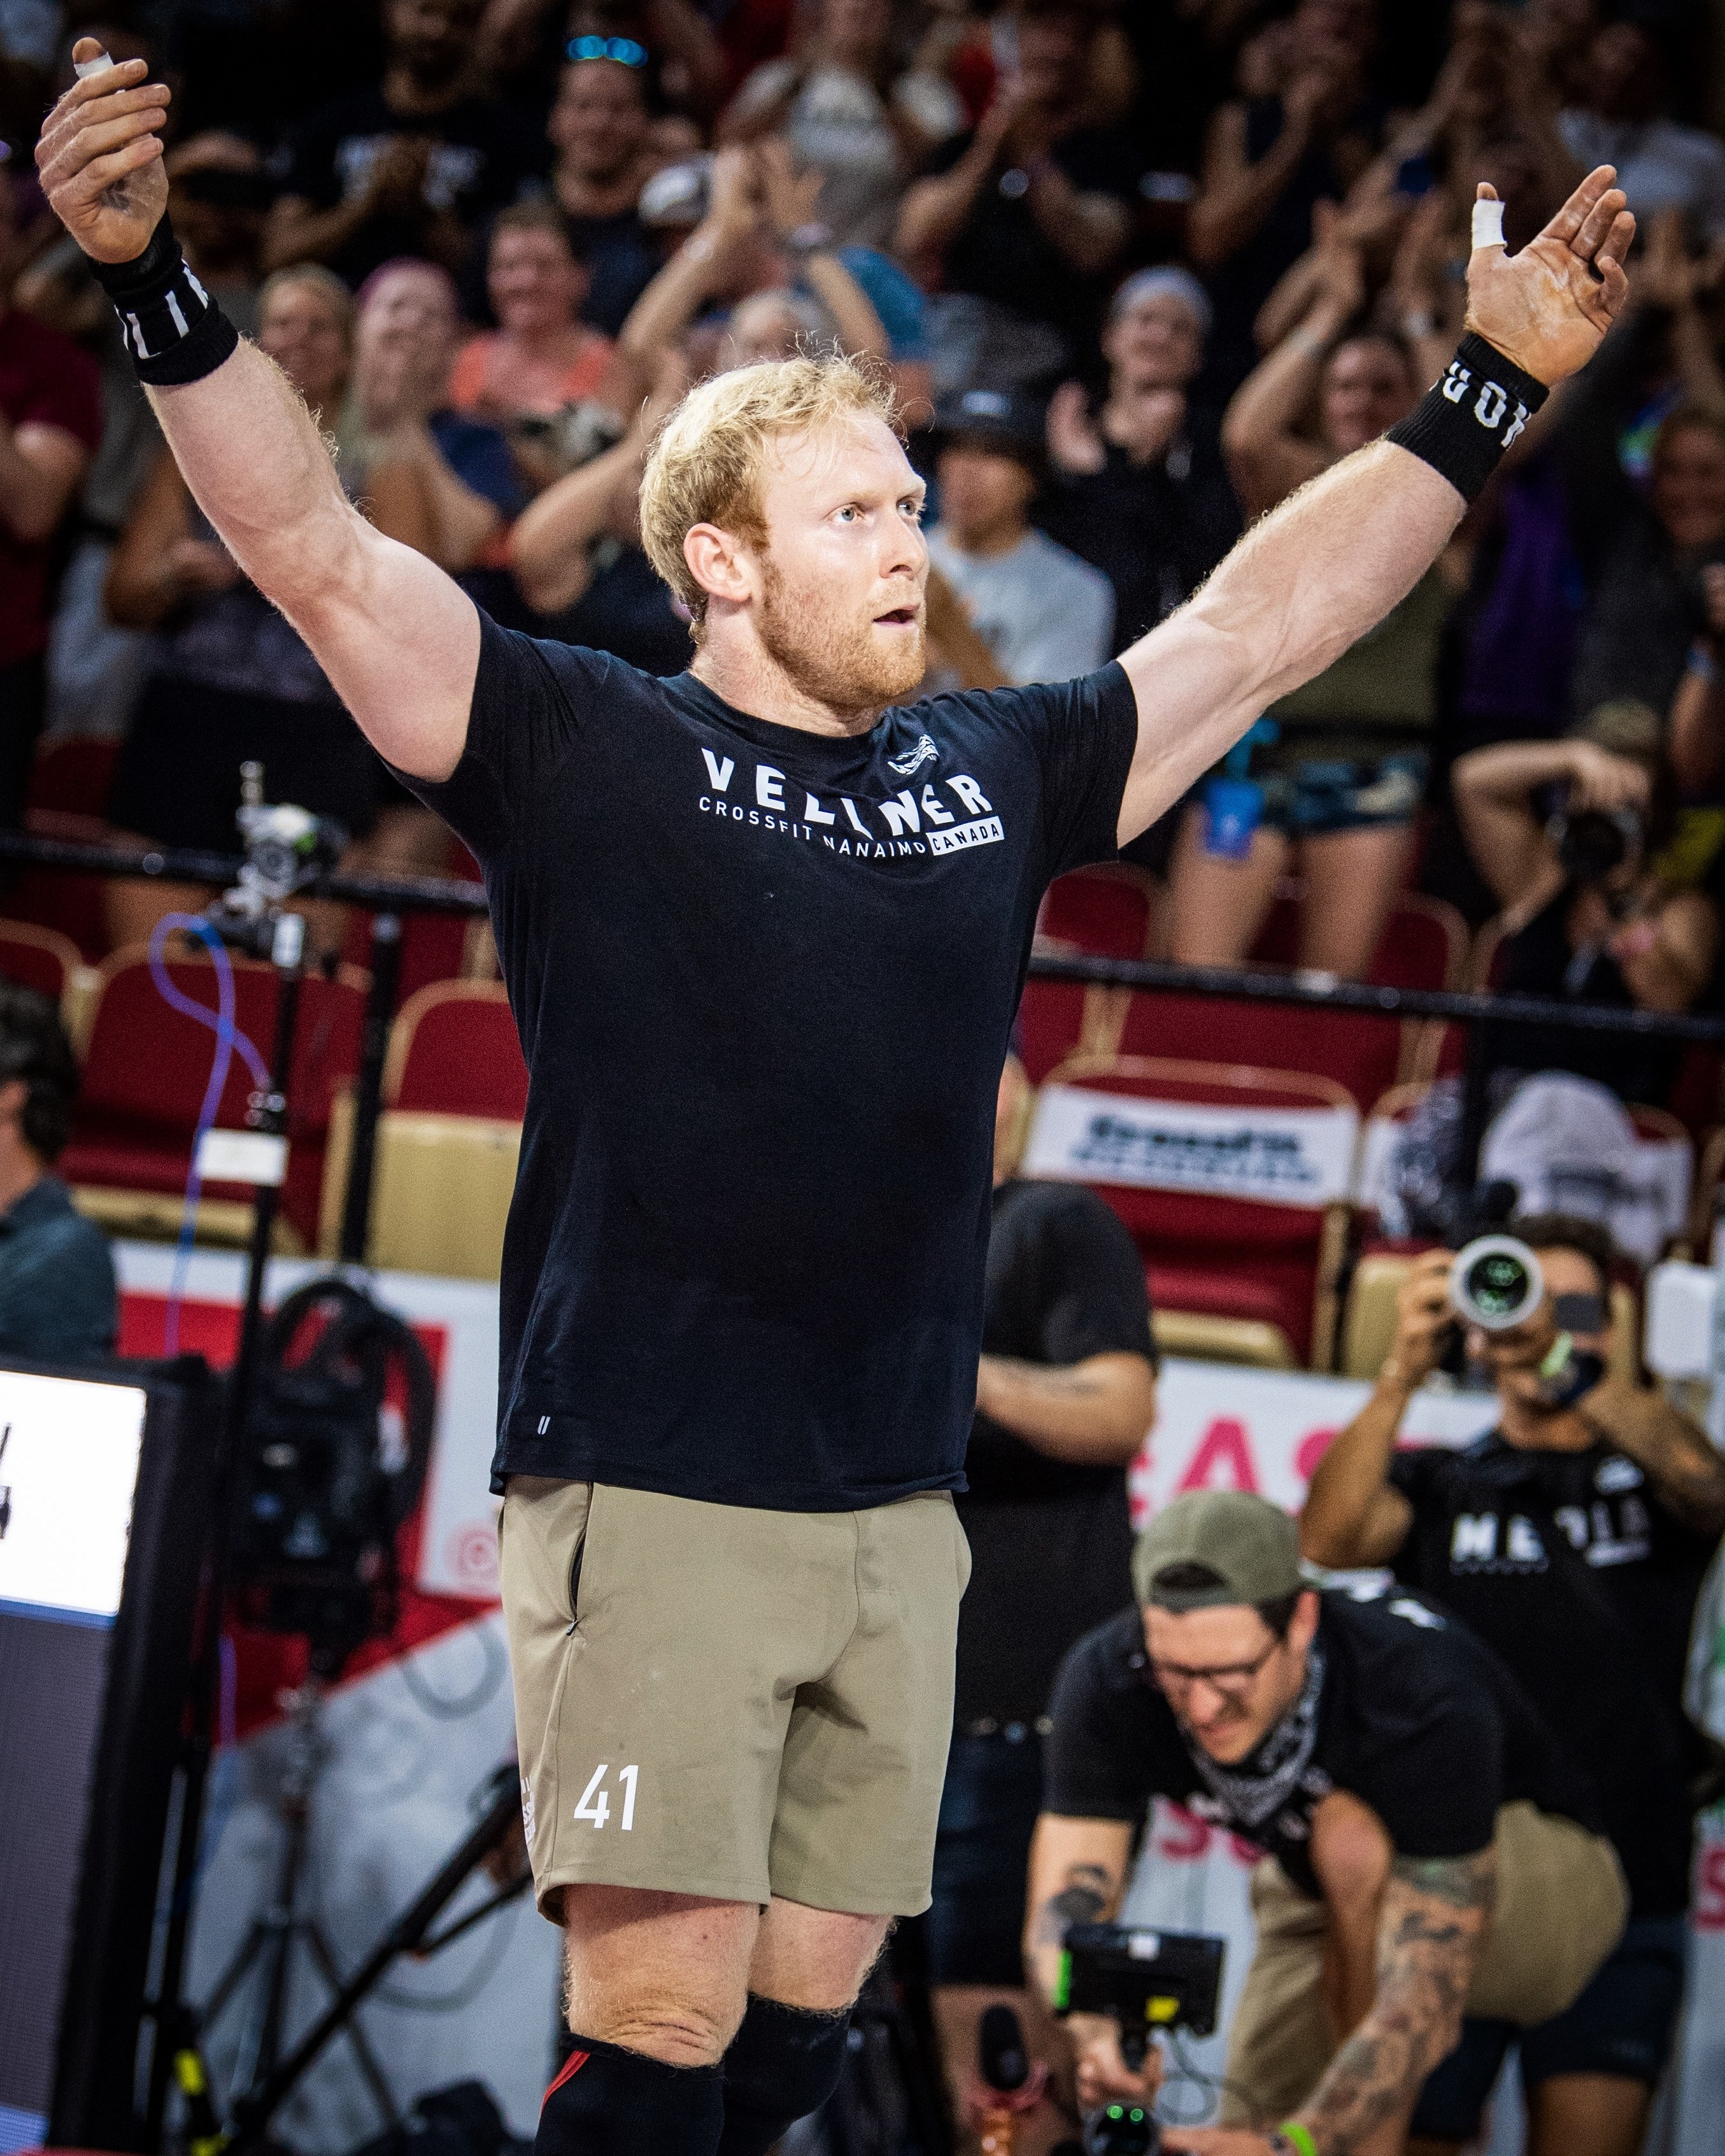 Patrick Vellner wins the final event of the day. Photo: CrossFit Games